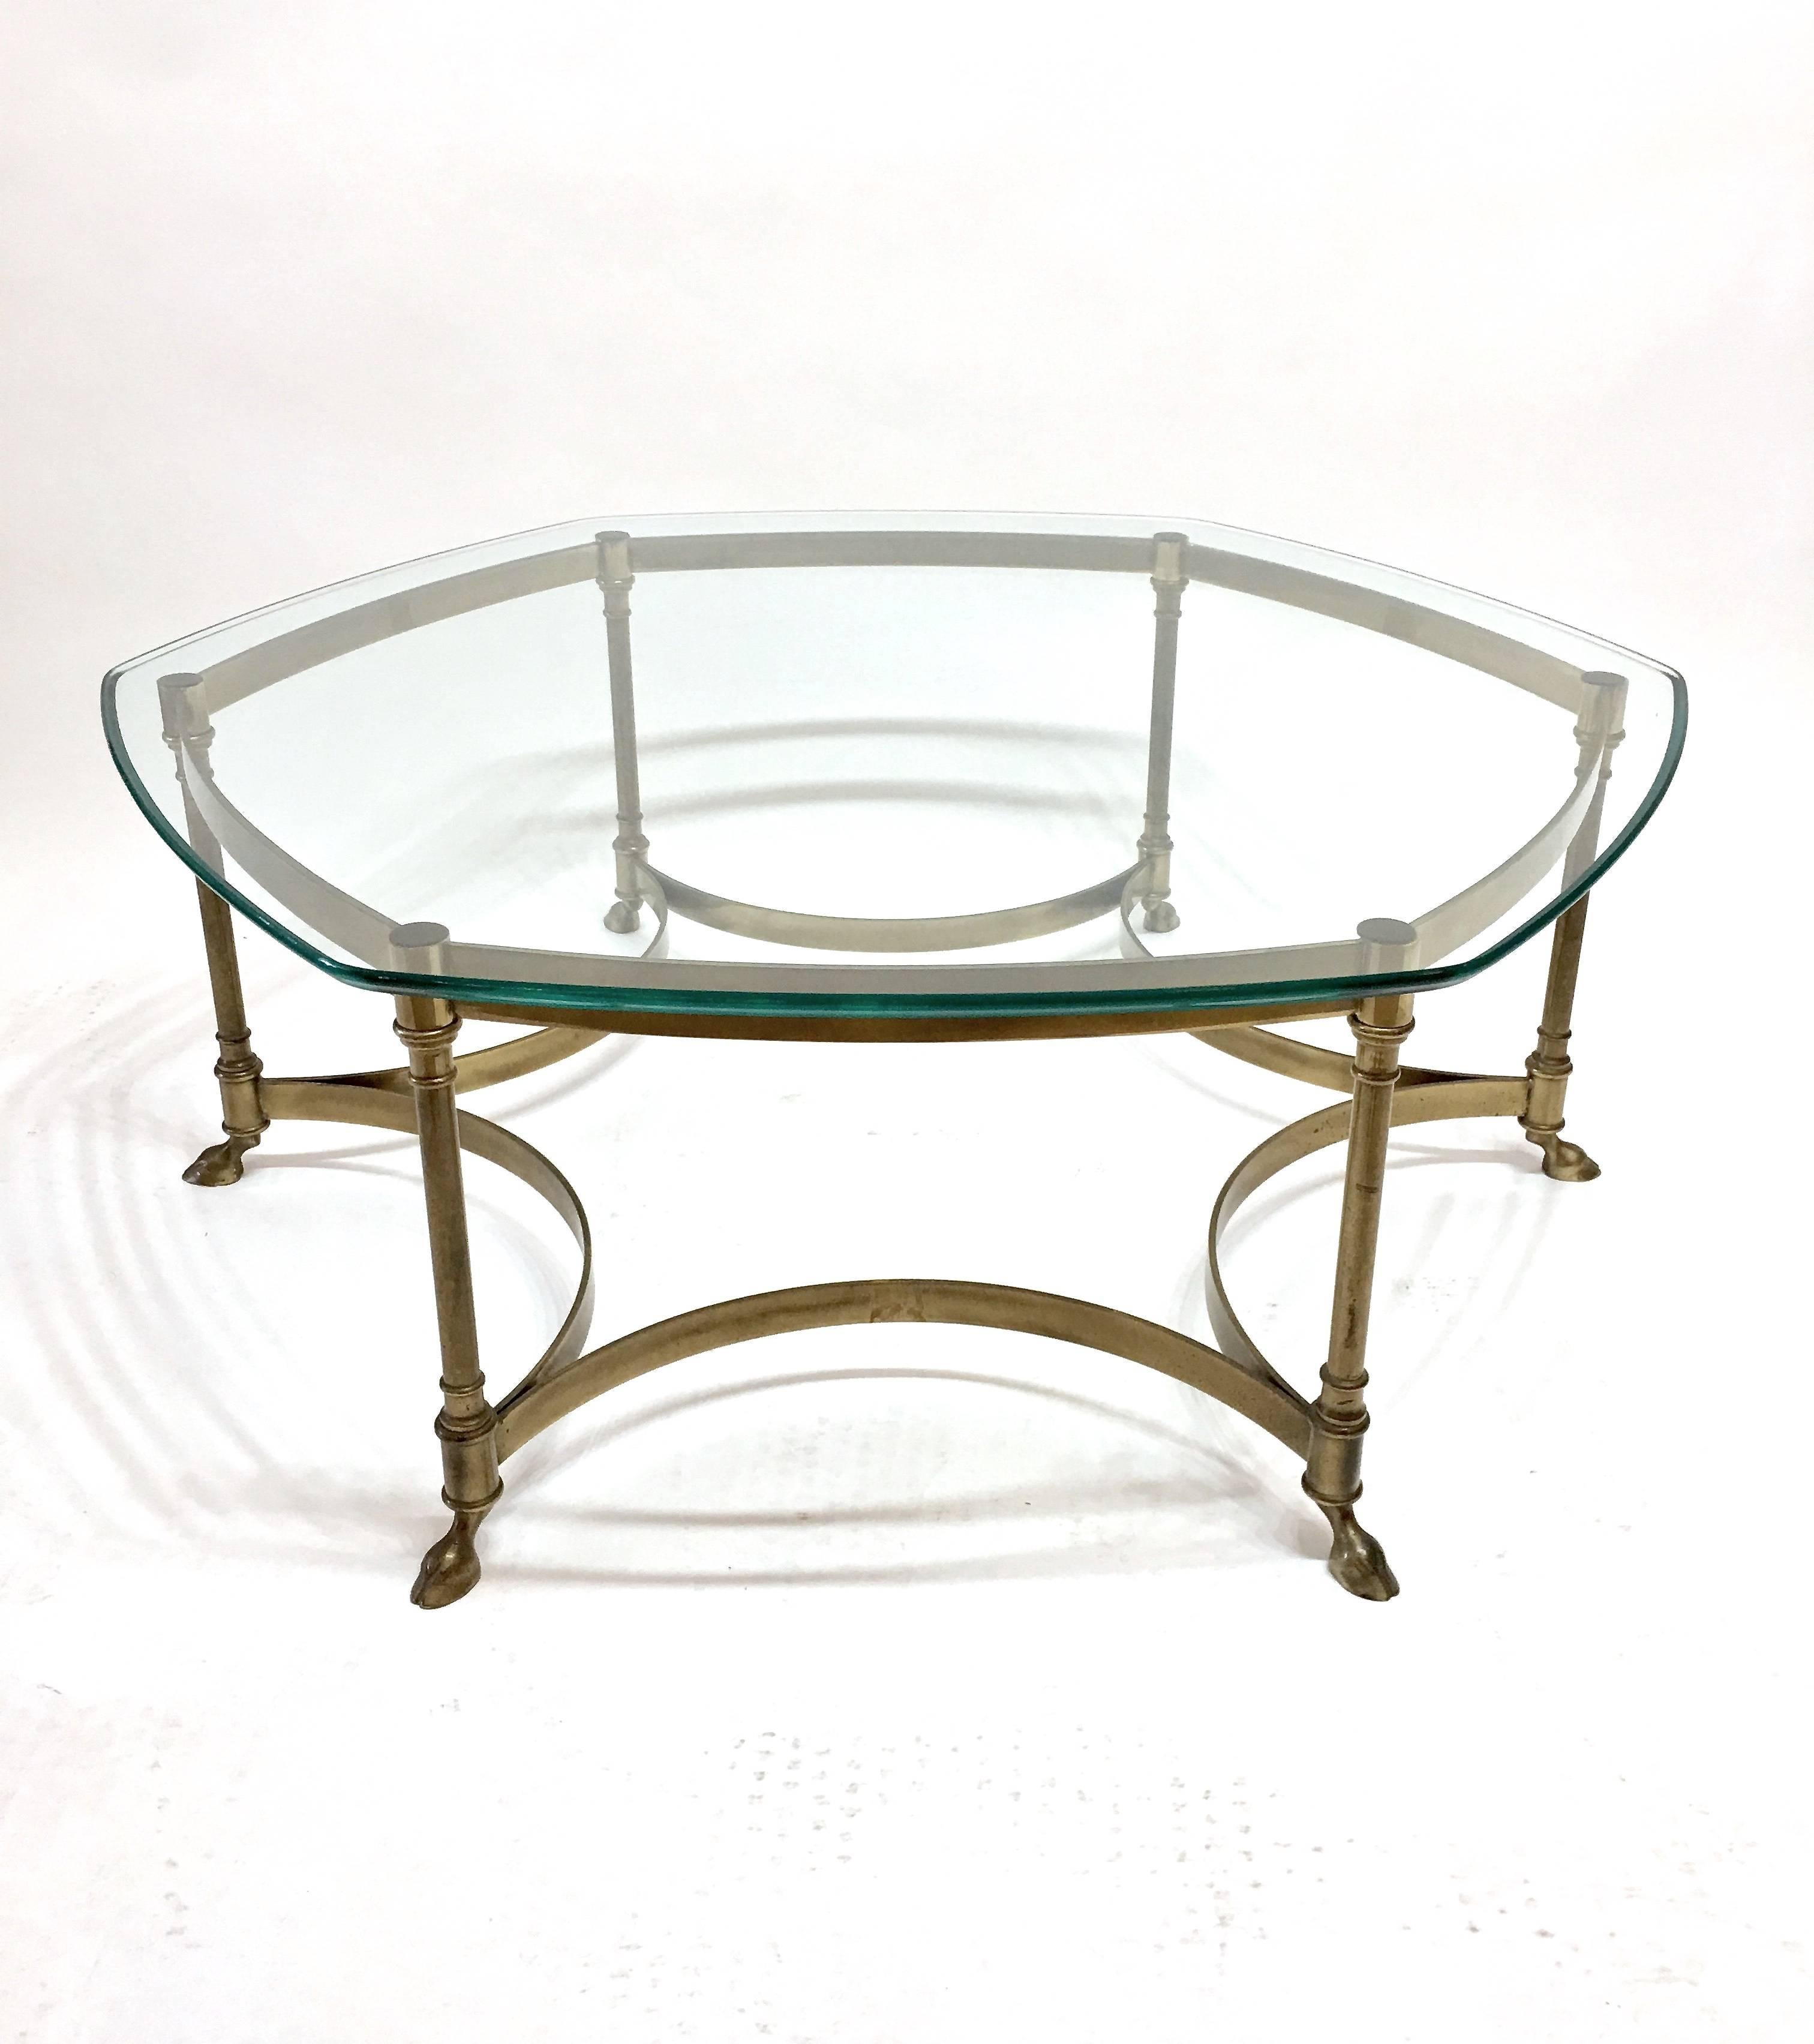 Great brass frame cocktail table by Mastercraft with six legs terminating with hoofed feet. The legs have concave brass stripping on the lower portion of the frame with detail to the tops and bottoms of legs. The glass top is all soft edges